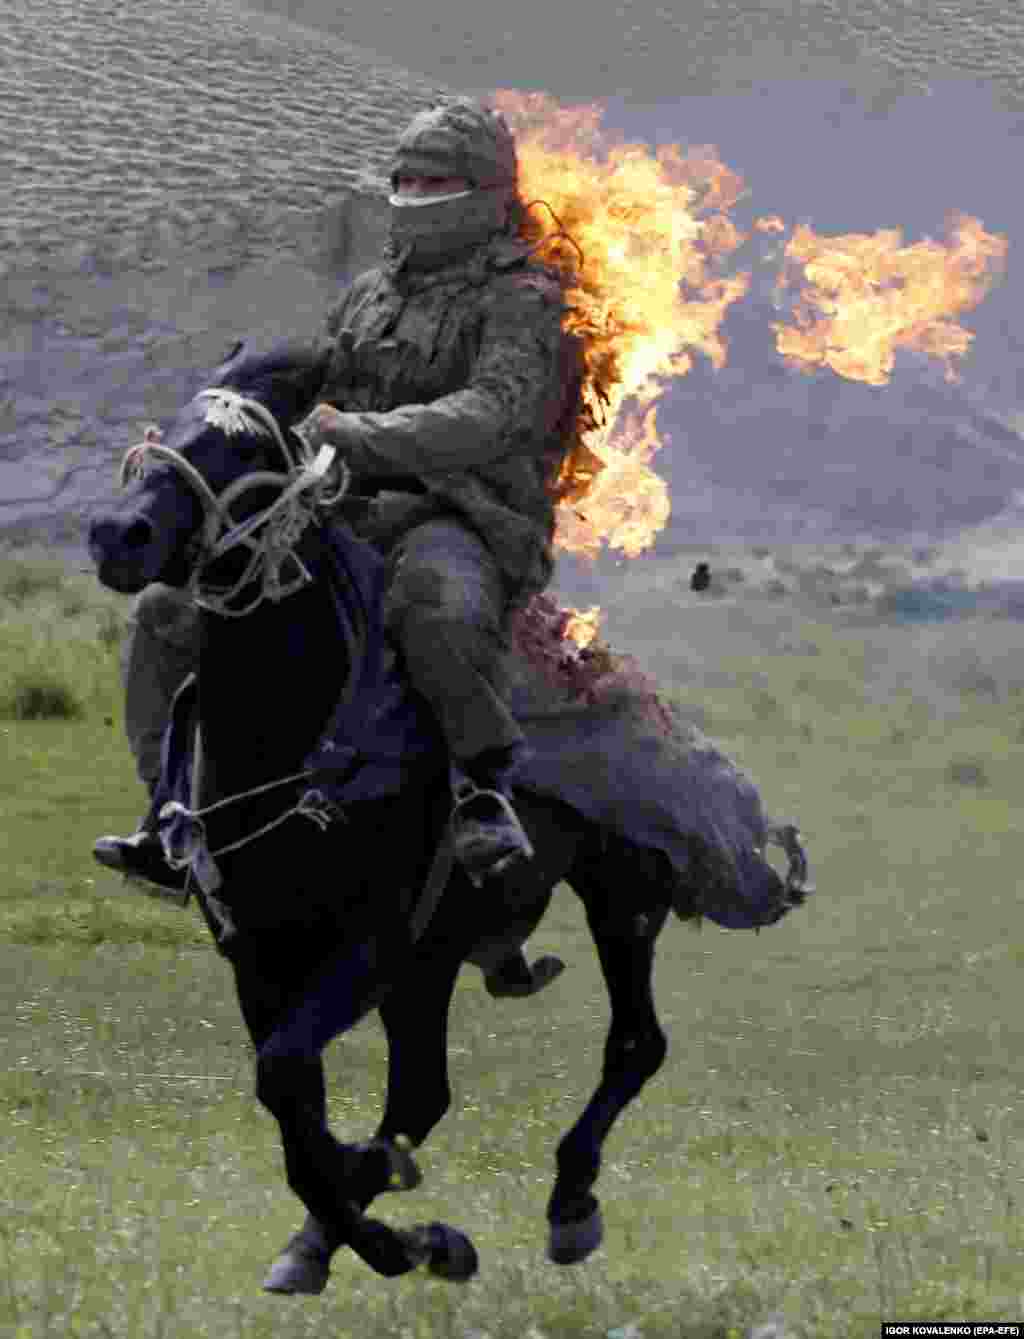 The bravery and showmanship of a Kyrgyz horseman is on display as he thunders across the plain while engulfed in flames. Horses are essential to the nomadic lifestyle, as life on the mountains and on the steppes would be impossible without them.